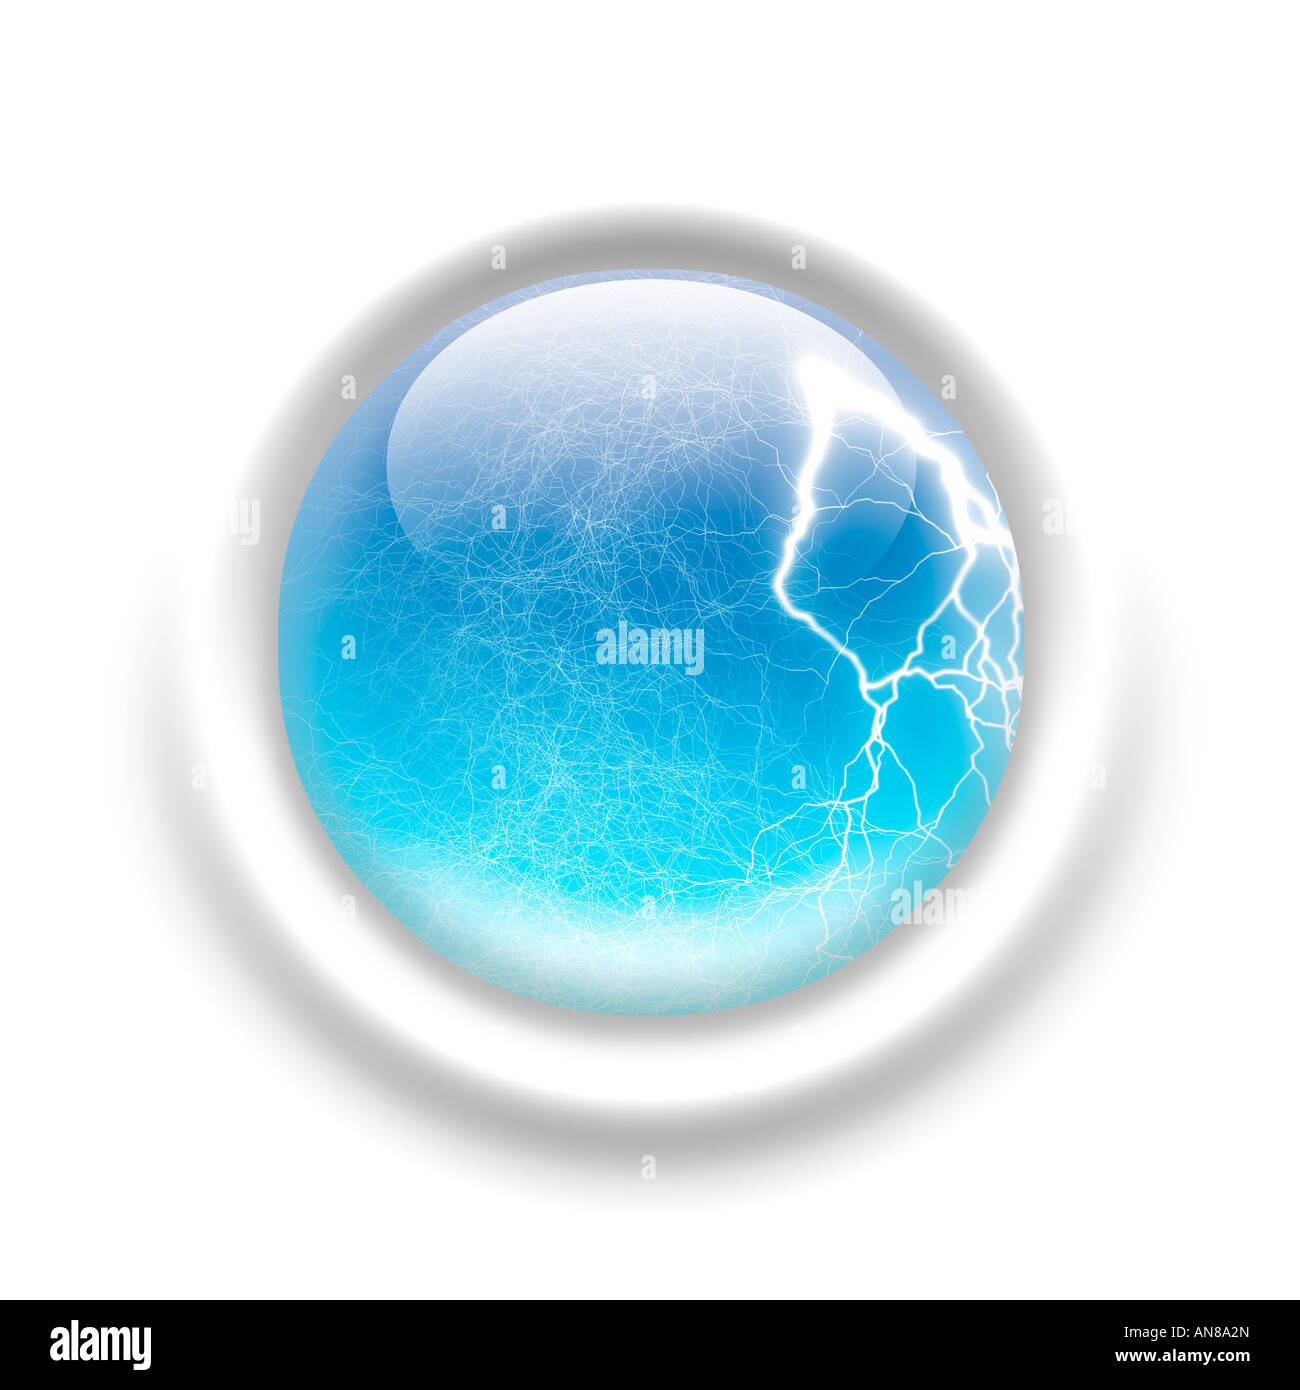 Lightning in the glass button Stock Photo